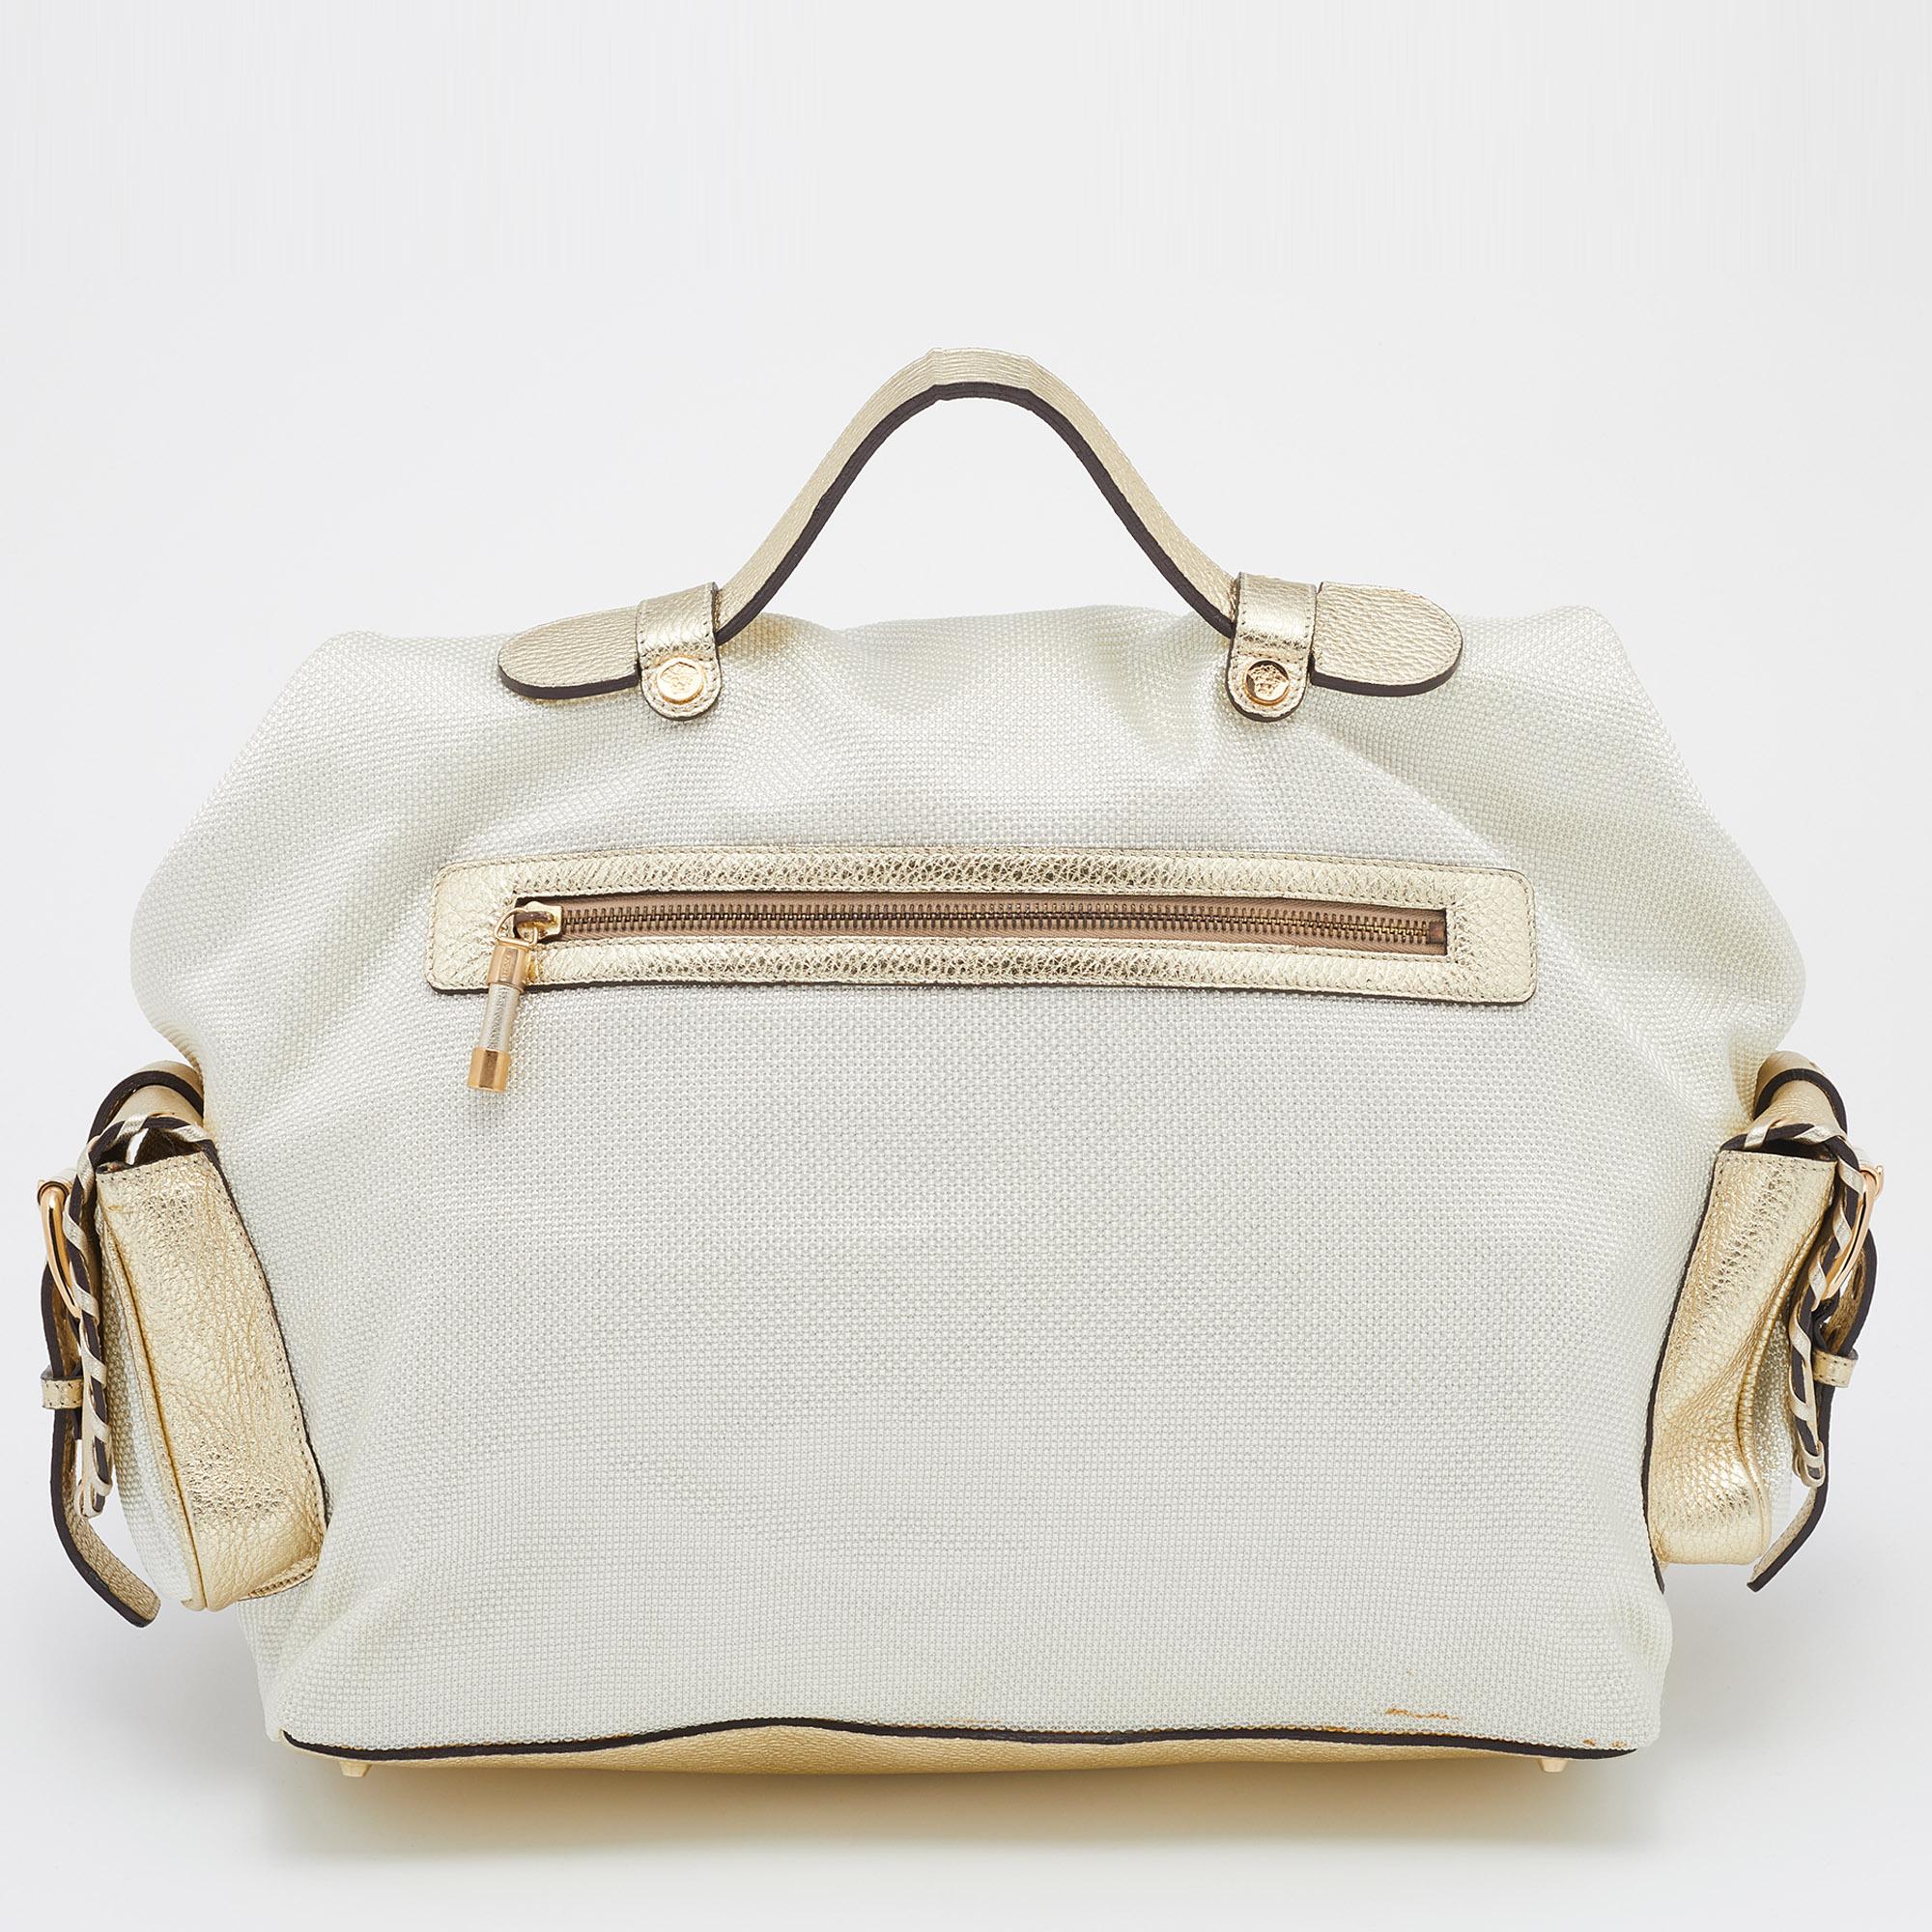 This gorgeous satchel comes from the House of Versace. It is crafted from metallic light-beige and gold leather and technical fabric on the exterior. It features two handles, gold-toned hardware, and a satin-lined interior. This stunning Versace